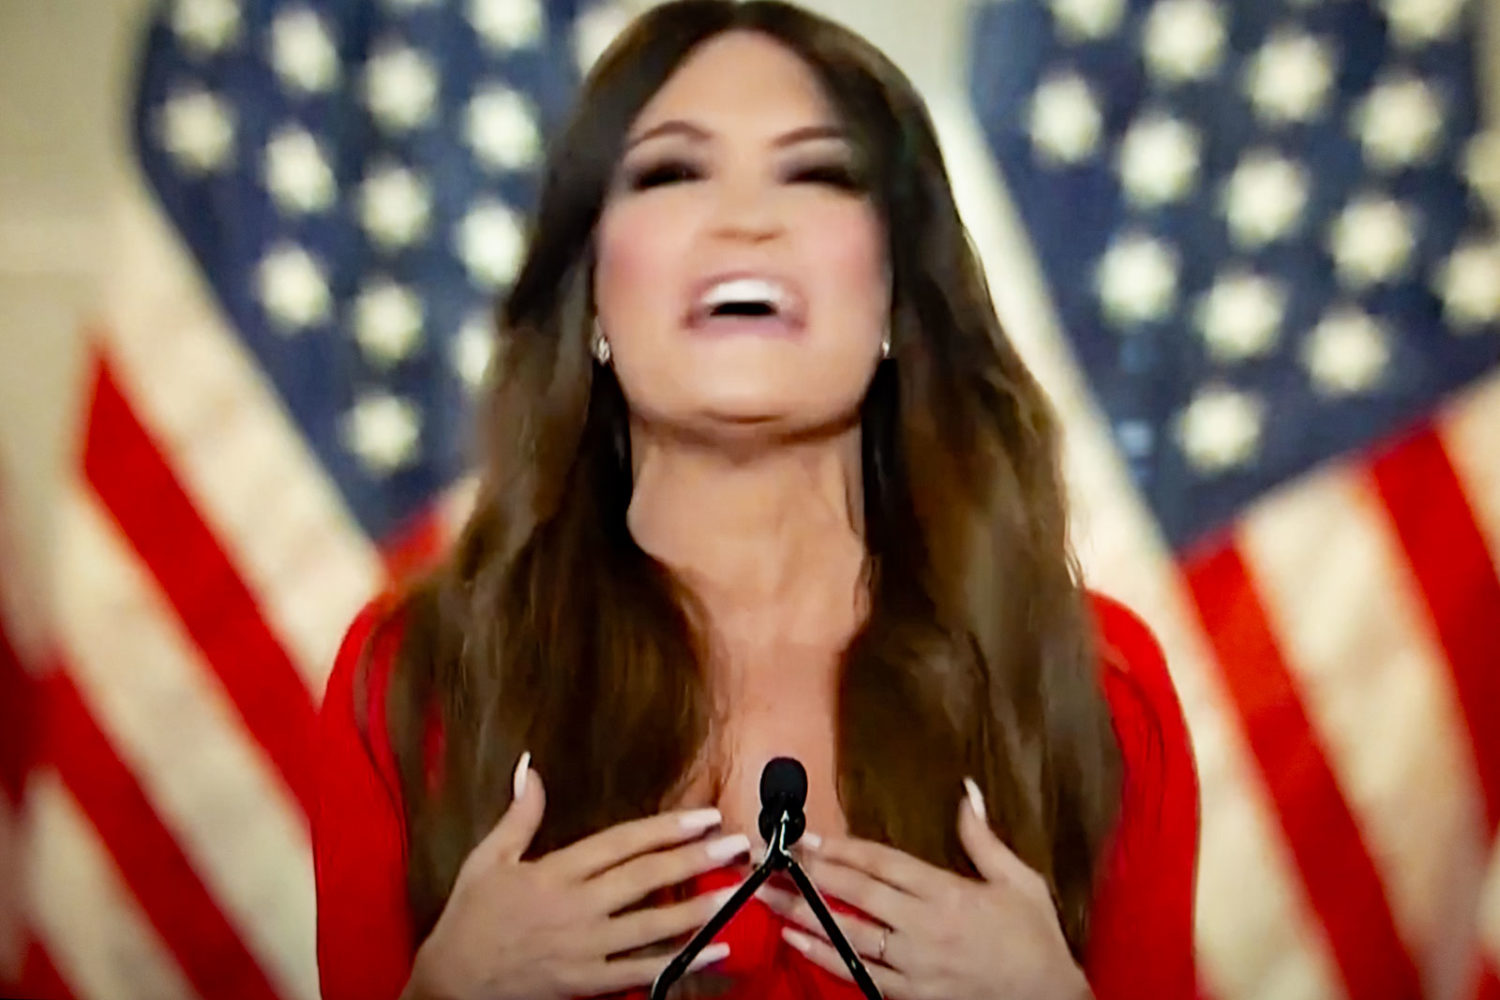 Kimberly Guilfoyle at the Republican Convention